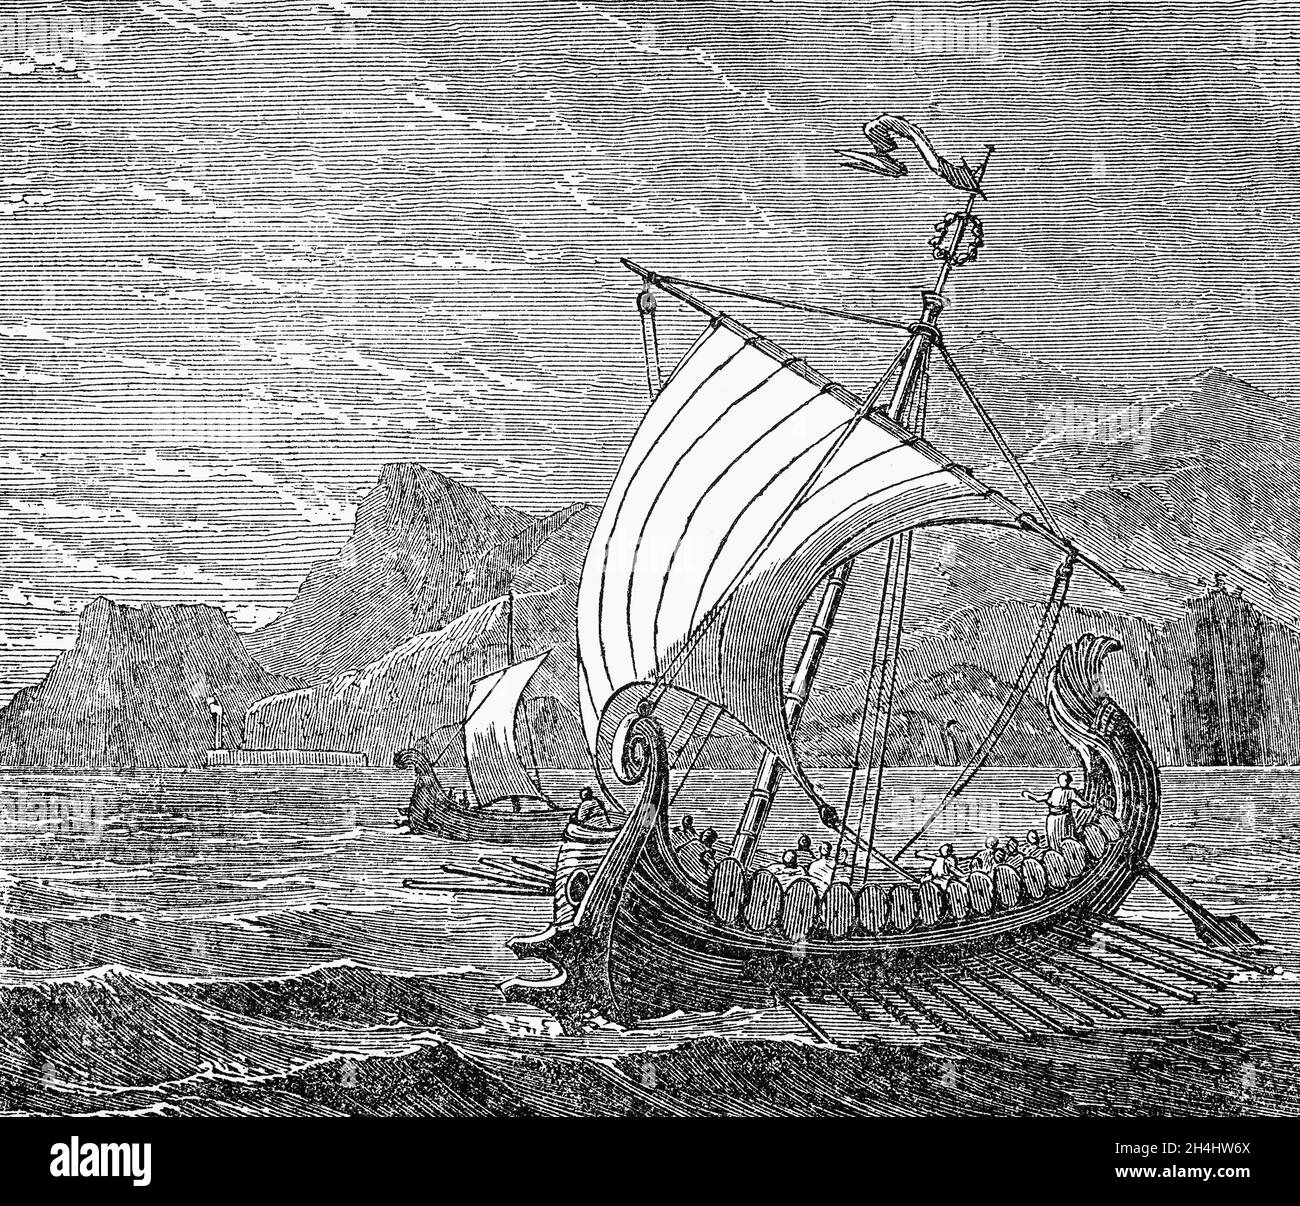 A late 19th Century illustration of a Roman Galley, a type of ship that is propelled mainly by oars and/ or sails. They have been around so long their exact origin remains unknown. By the time naval warfare was being recorded, they allowed naval powers to dominate the Mediterranean world.  Galleys went on to play a huge part in the battle for the Mediterranean between the Romans and Carthaginians in the 3rd and 2nd centuries BC – the Punic Wars. Stock Photo